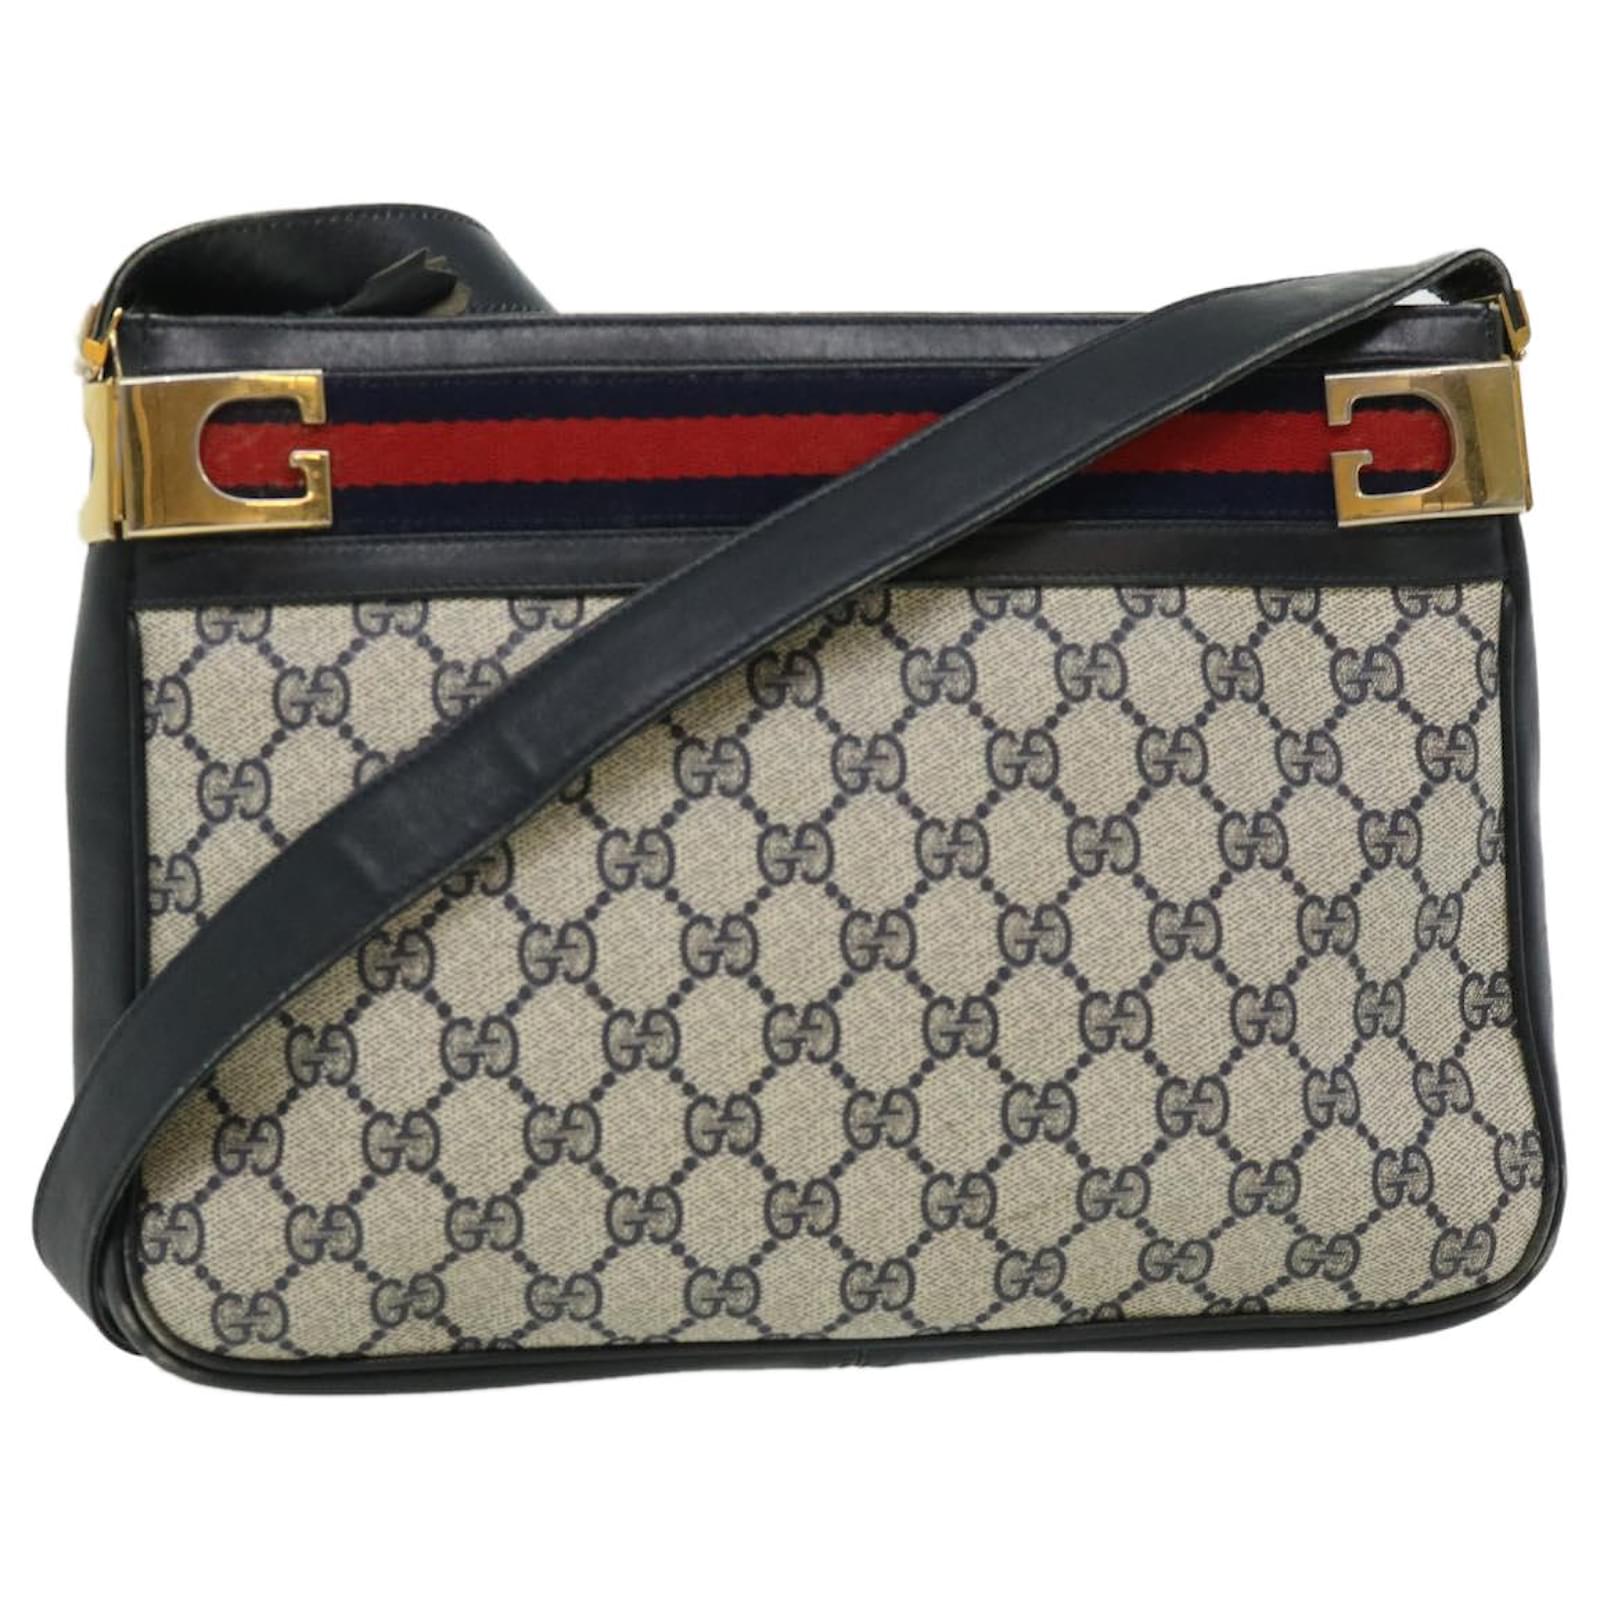 Auth GUCCI Navy PVC & Leather Sling Bag Cross Body Shoulder